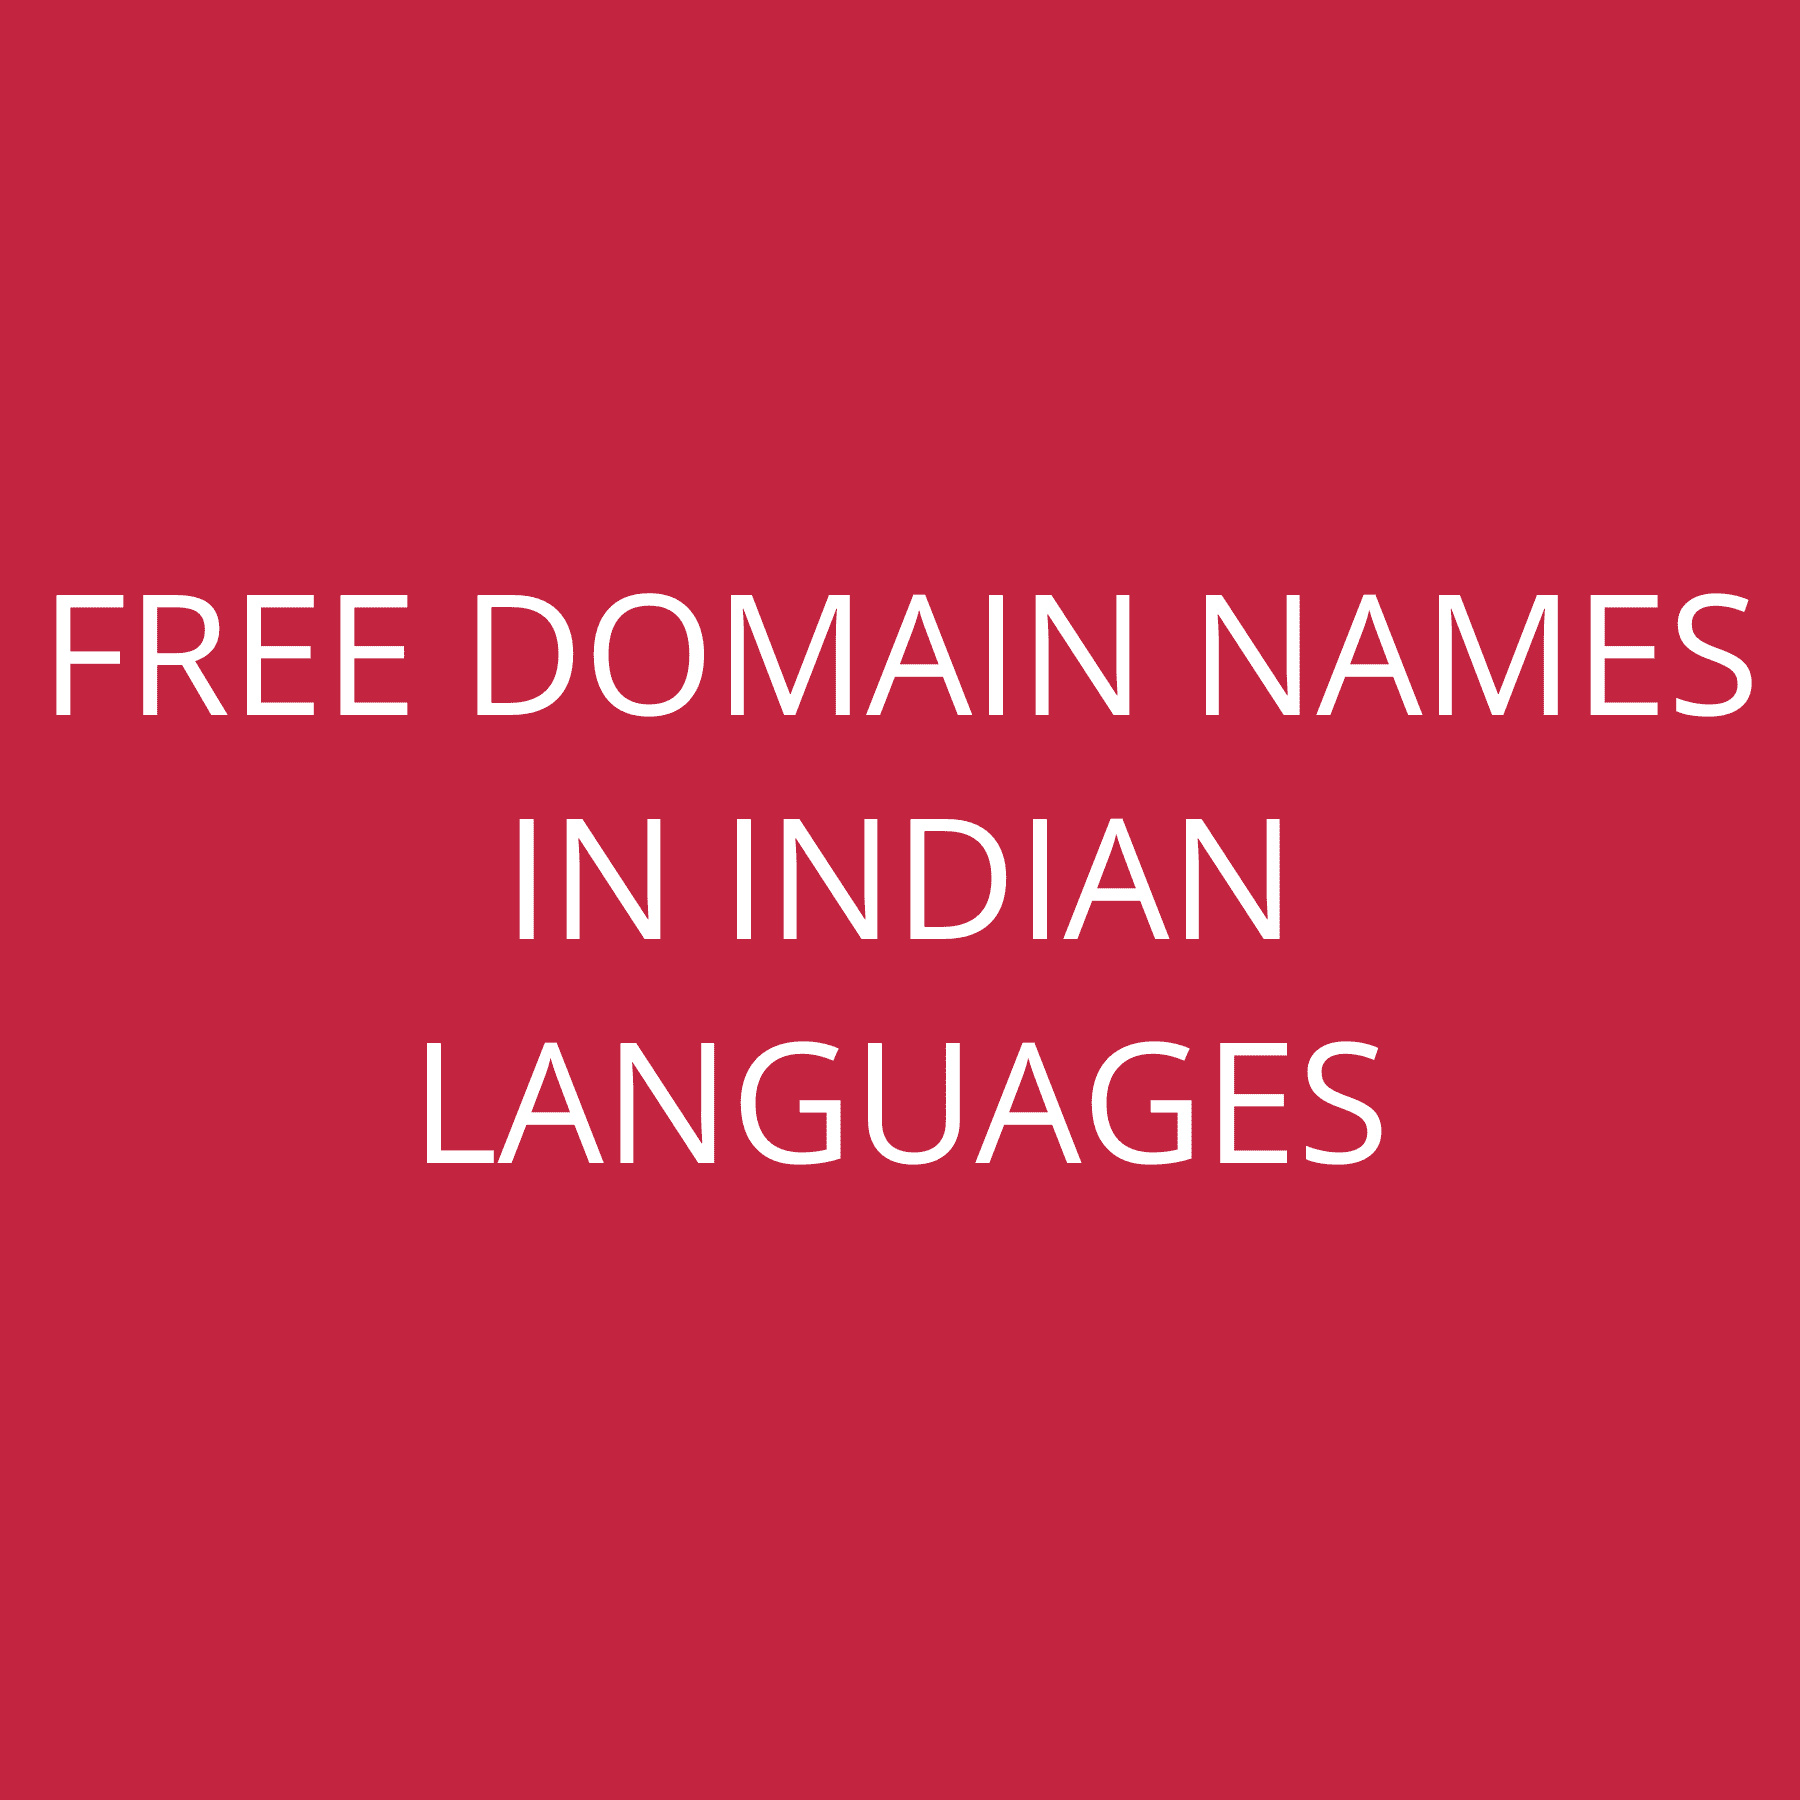 Free domain names in Indian Languages